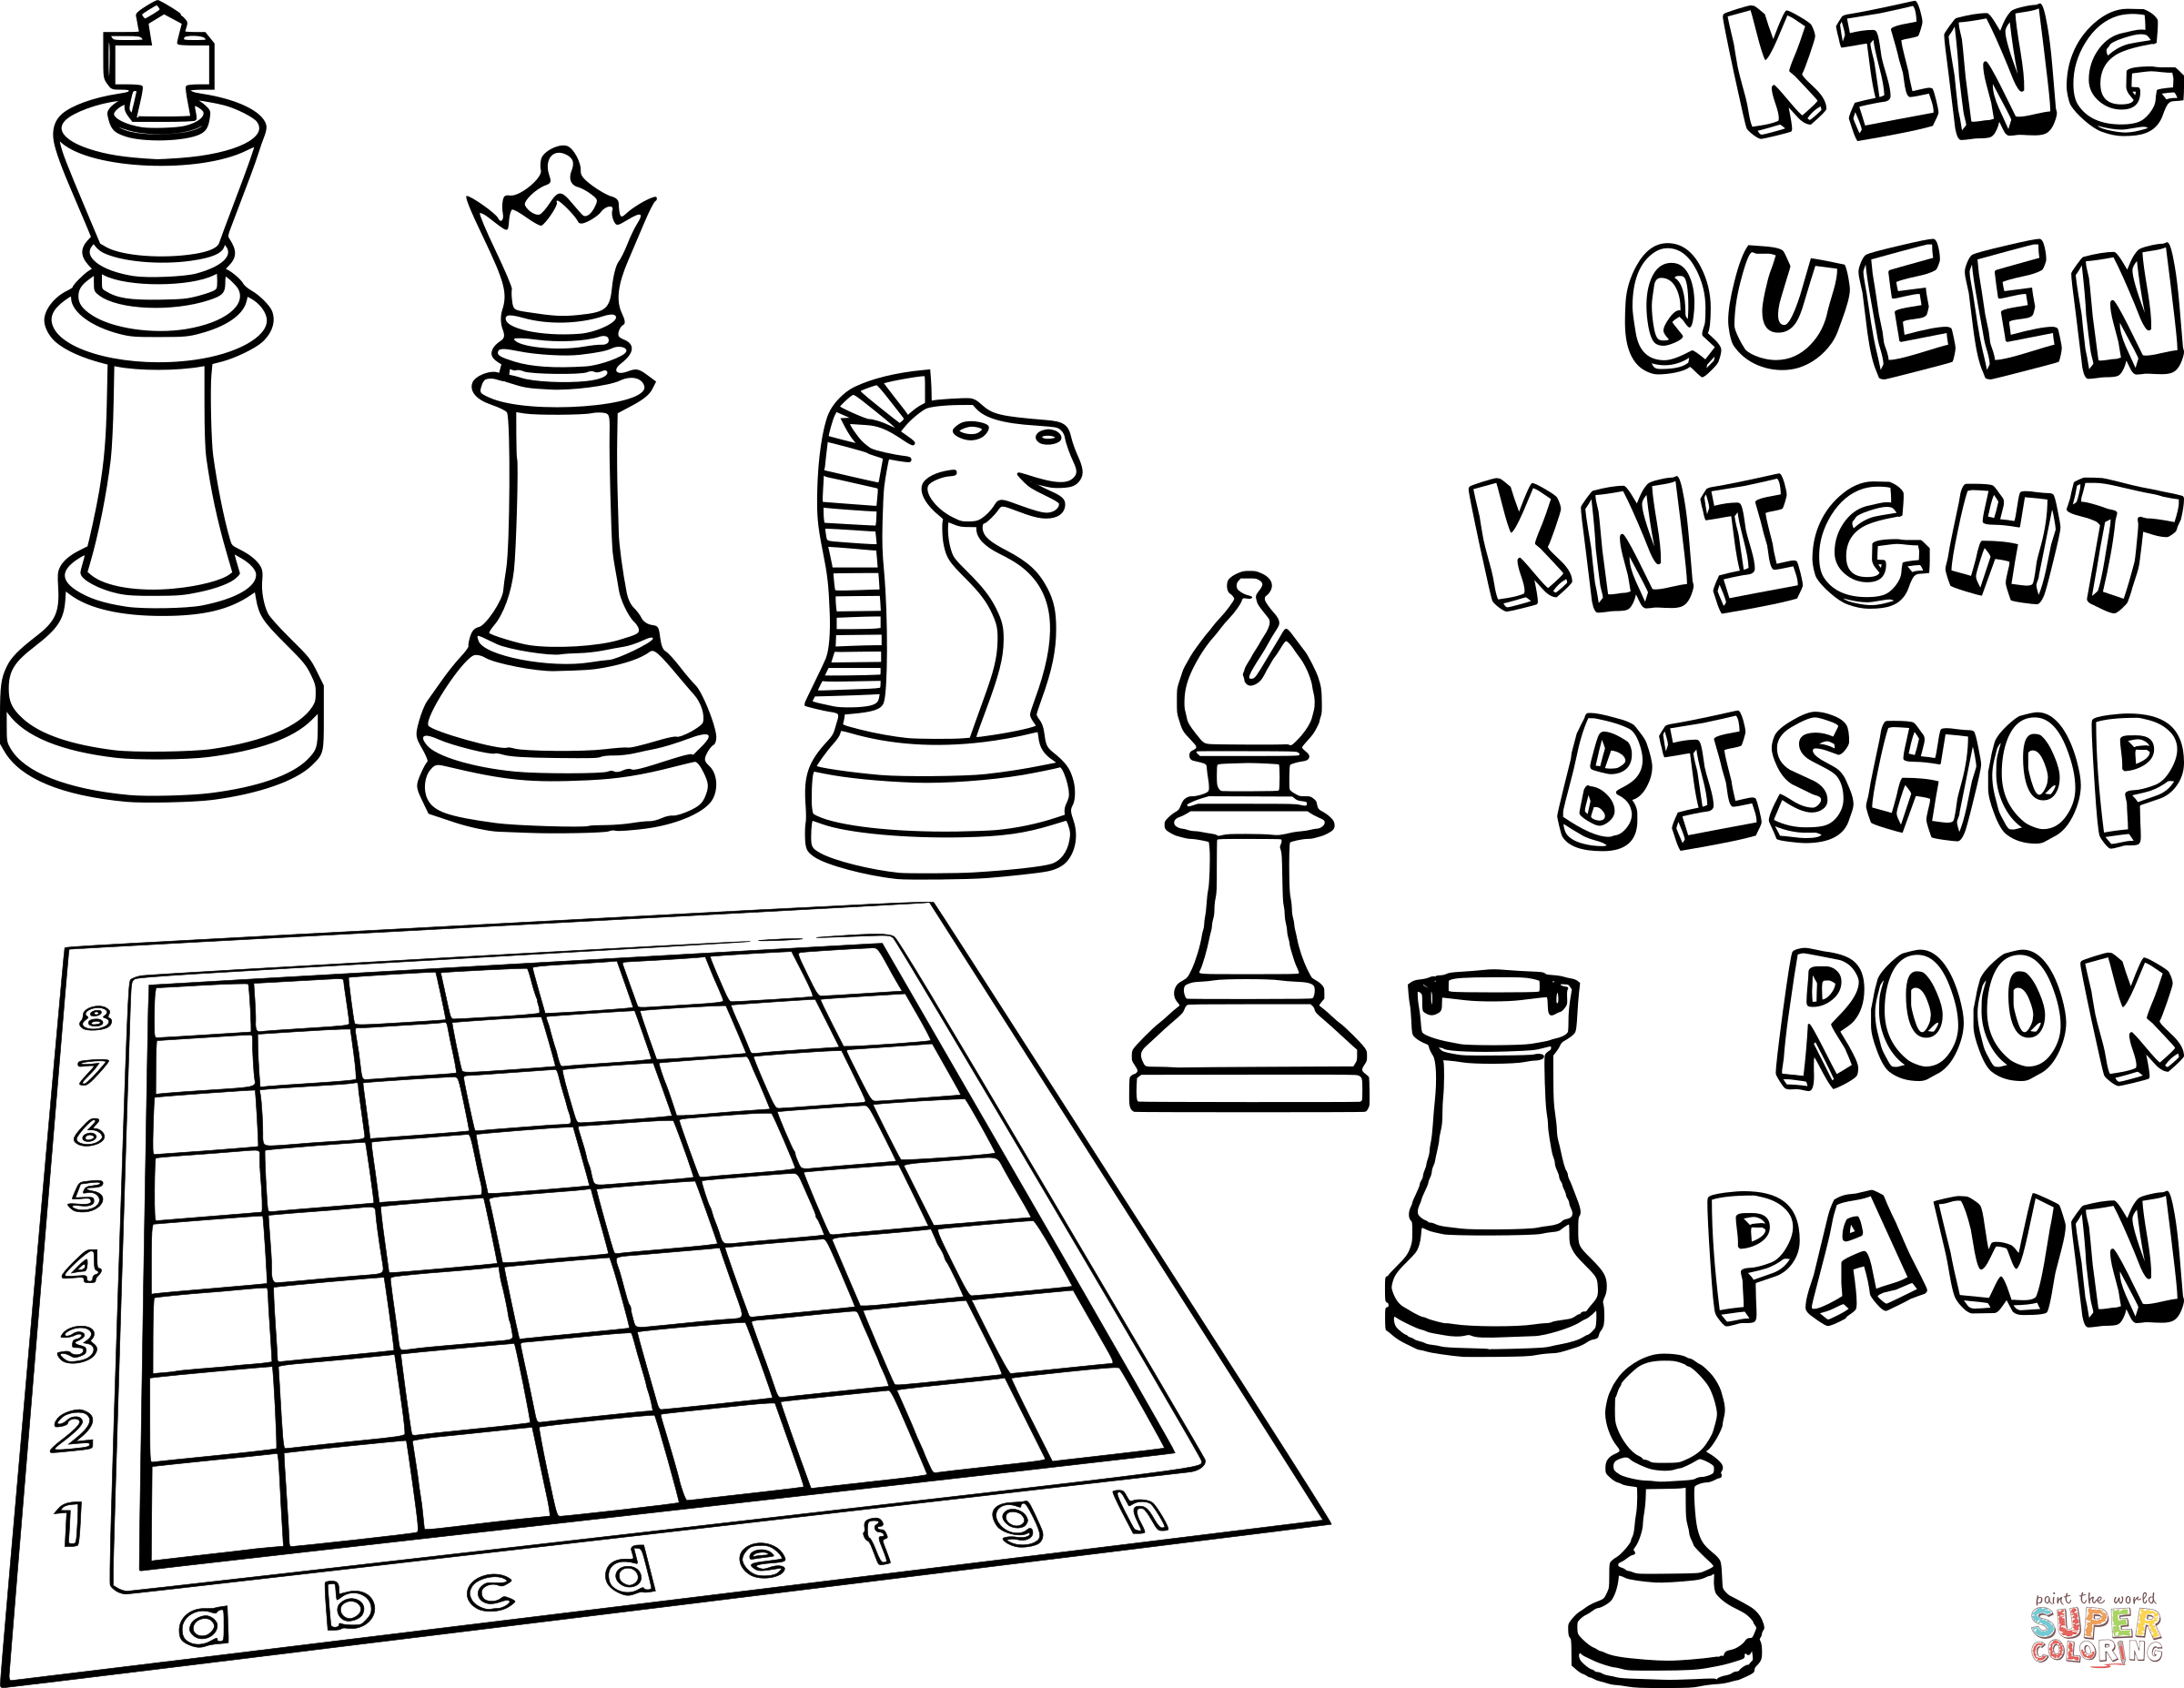 Chess Pieces coloring page | Free Printable Coloring Pages